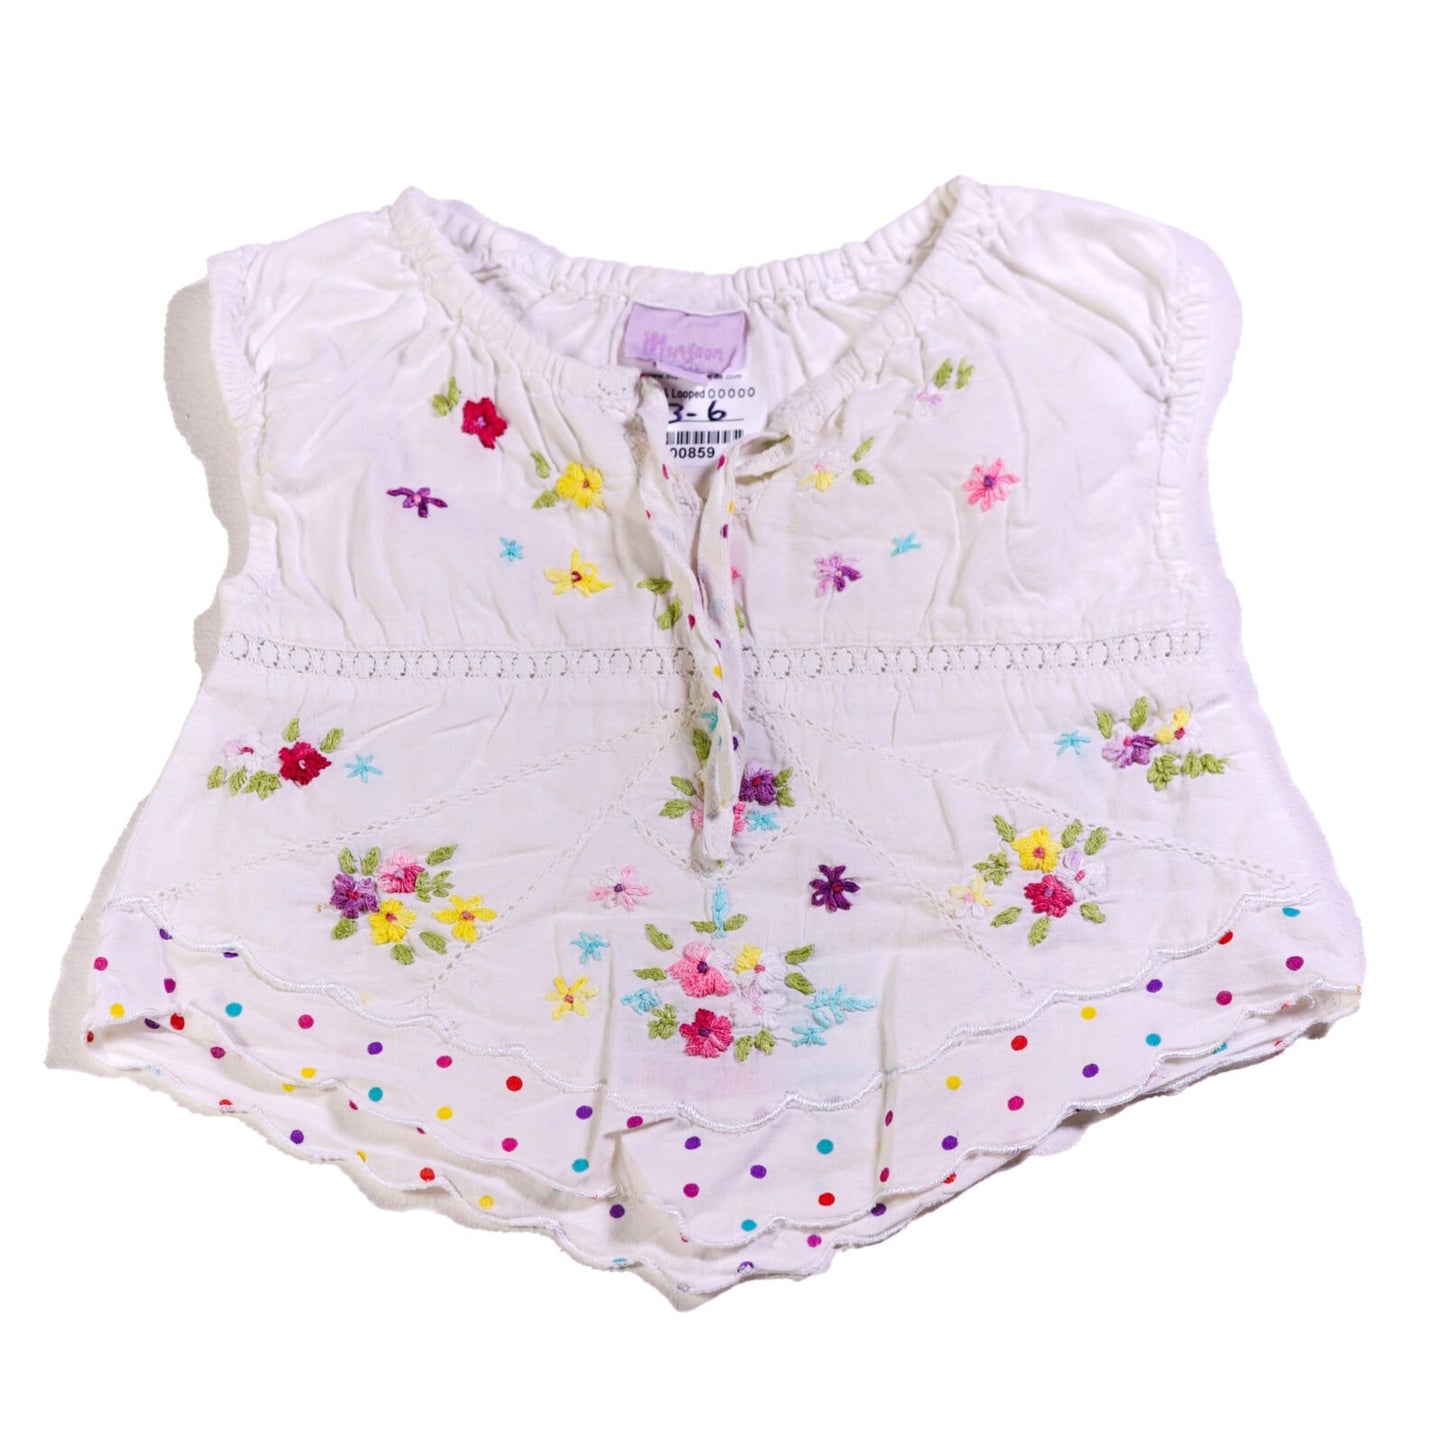 Cotton top with embroidered flowers and cap sleeves